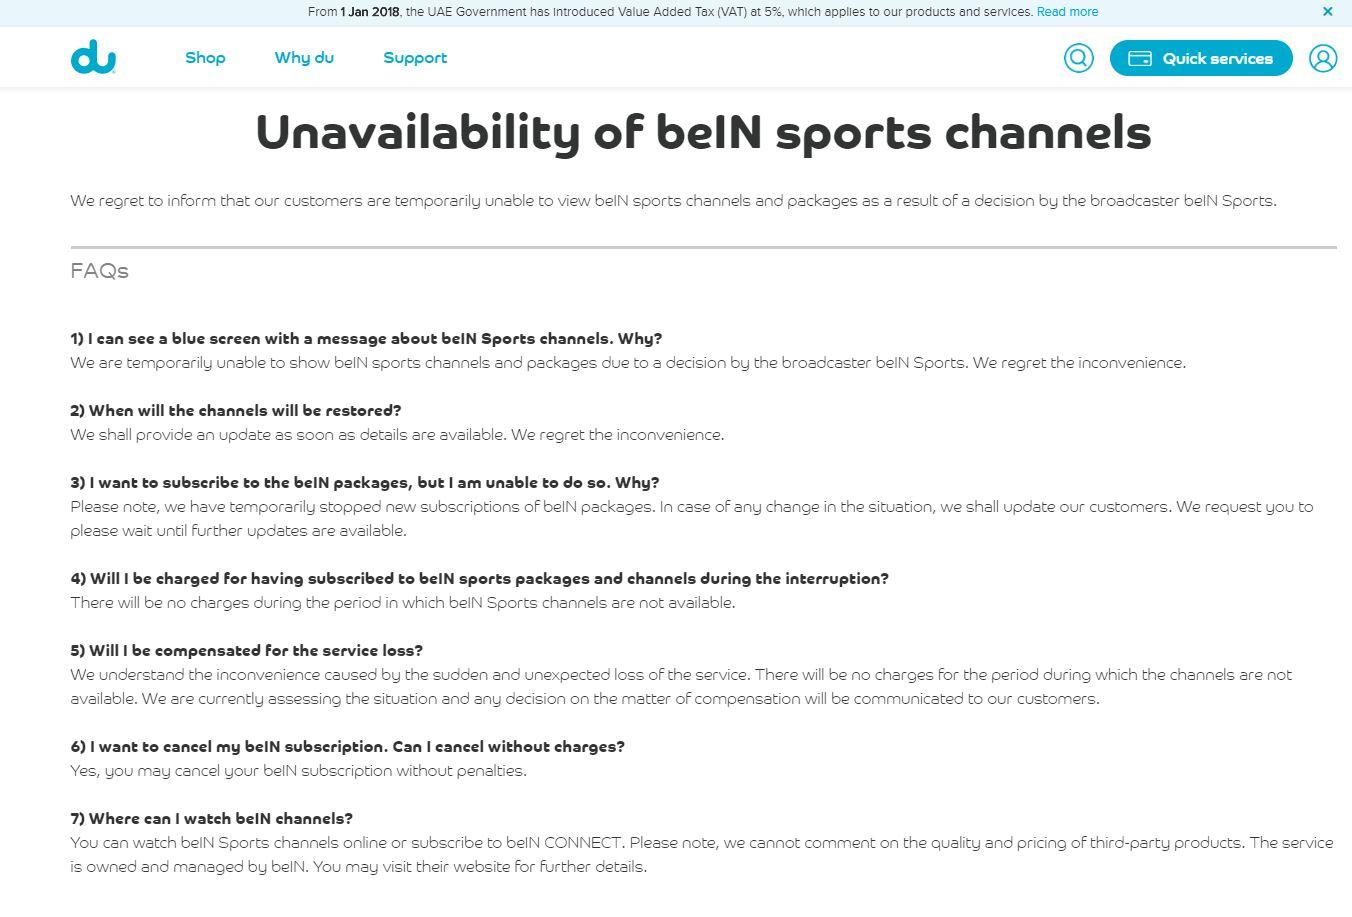 beIN Sports channels unavailable on du after sudden and unexpected loss of the service